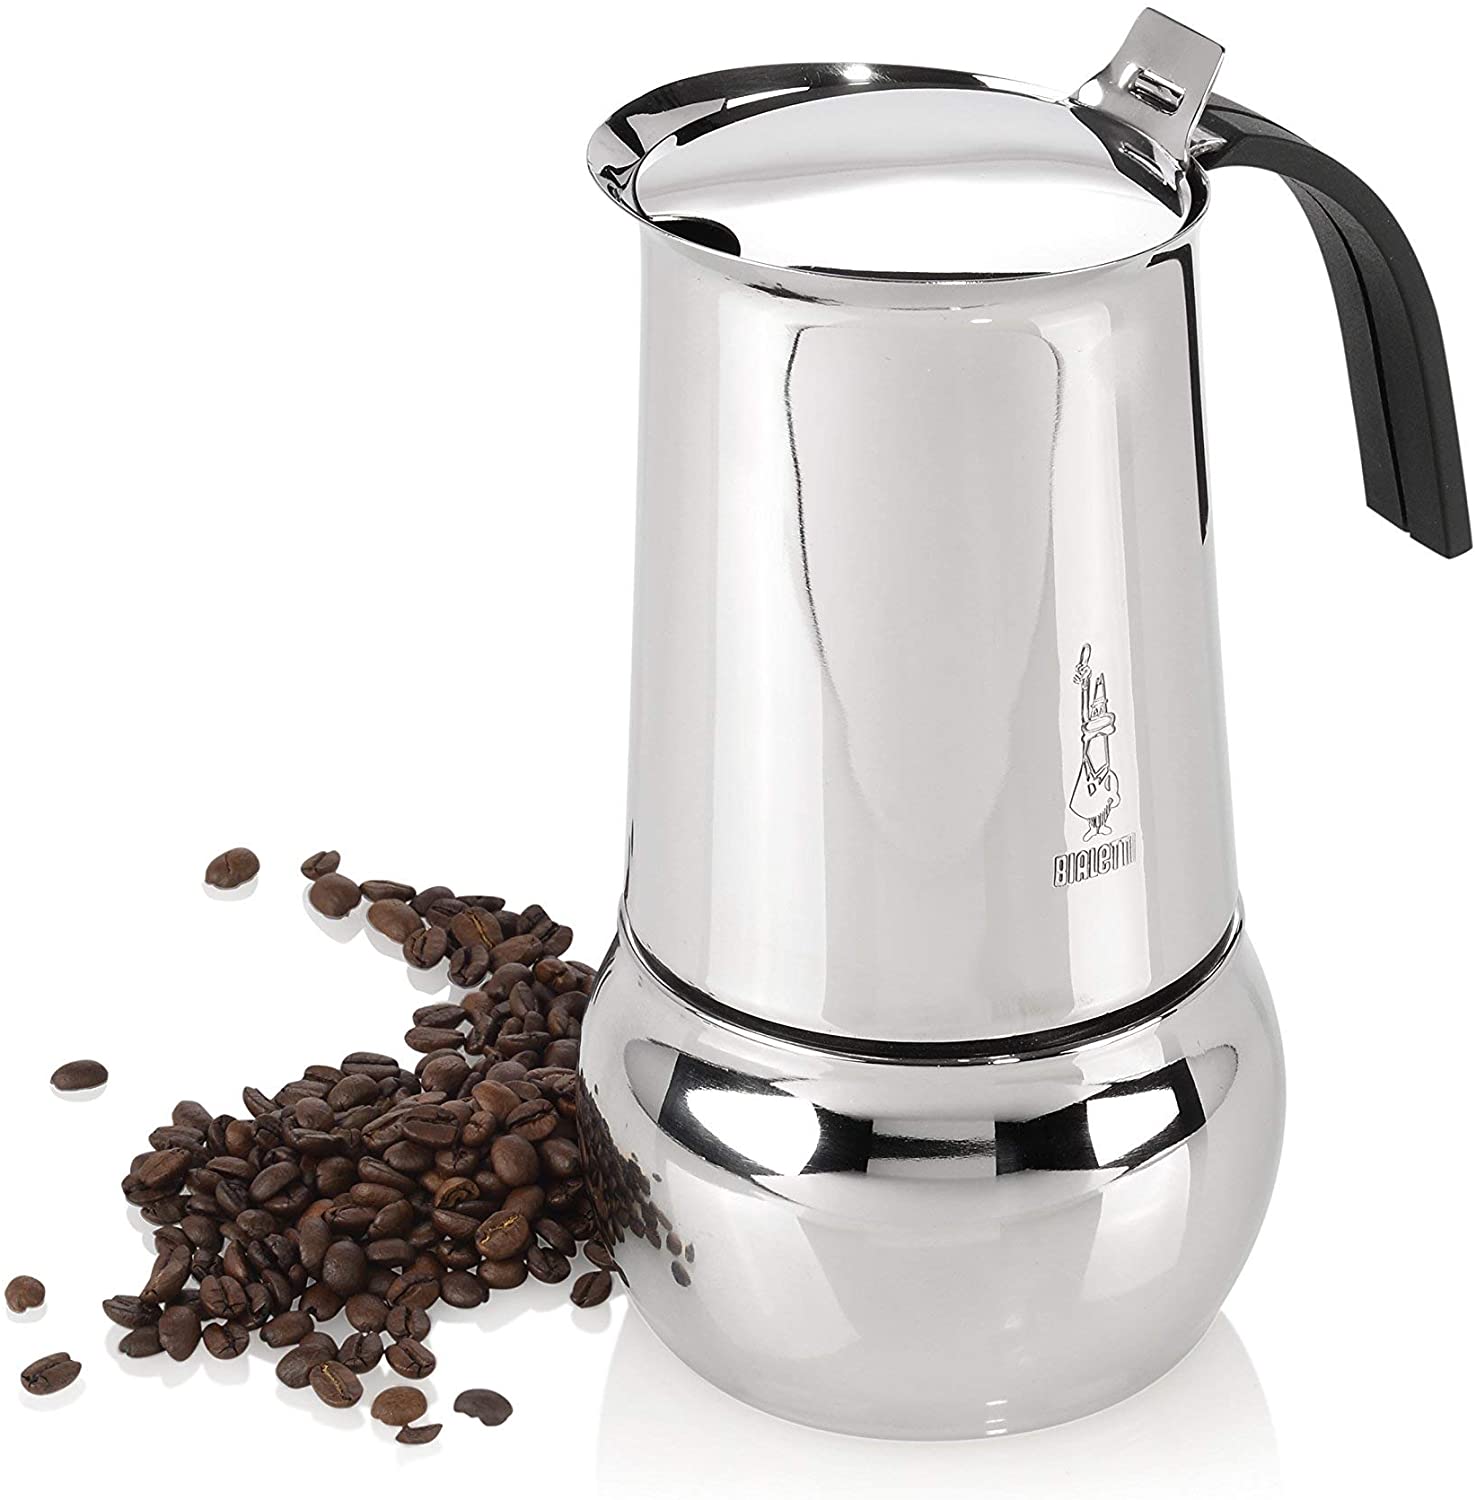 Bialetti: Kitty Nera 10 Cup Espresso Coffee Maker in Stainless Steel - Induction